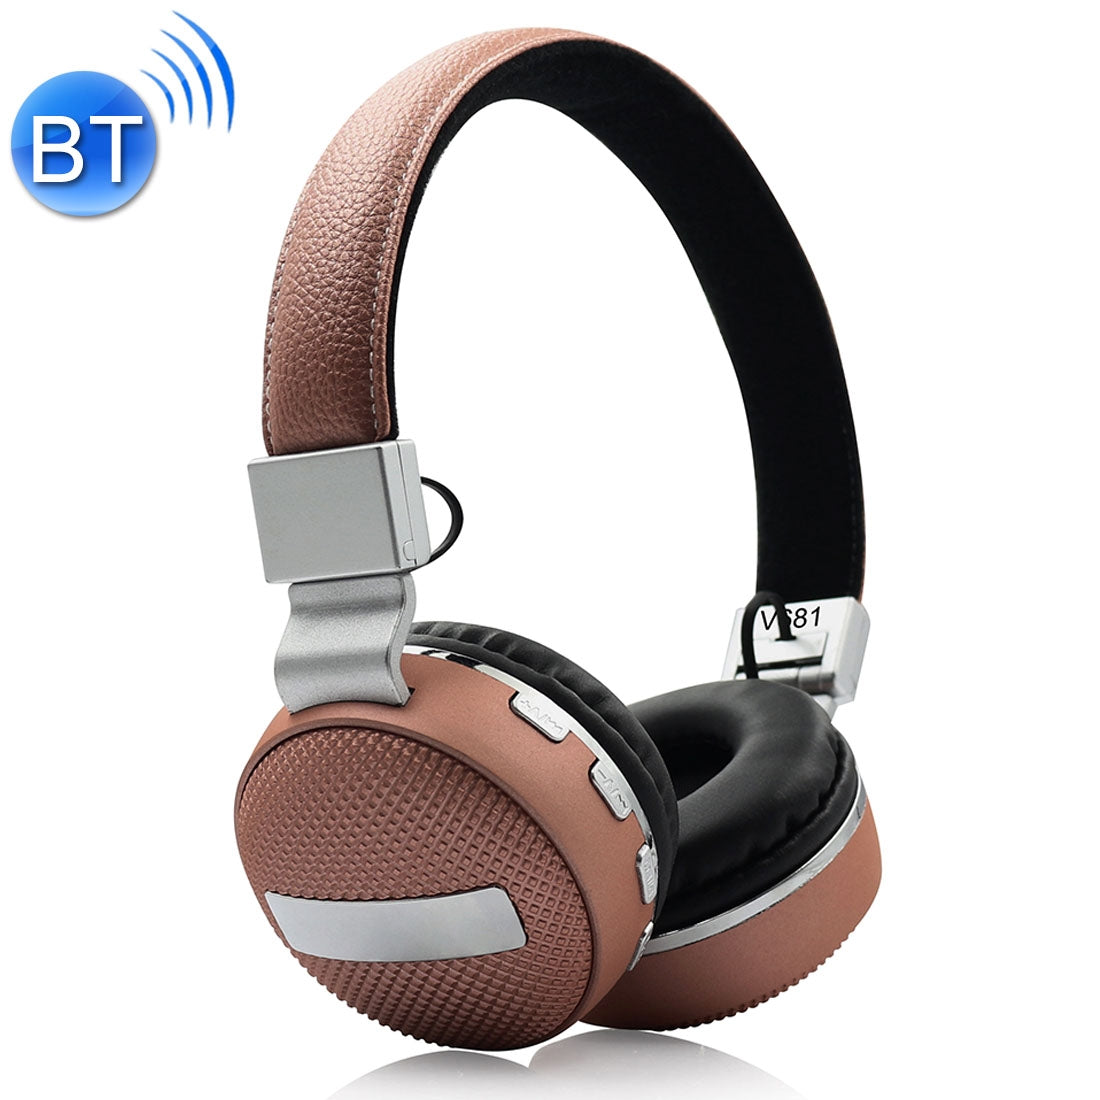 V681 Wireless Bluetooth 4.2 Headphone with Mic & FM & TF Card, For iPhone, iPad, iPod, Samsung, HTC, Sony, Huawei, Xiaomi and other Audio Devices(Brown)